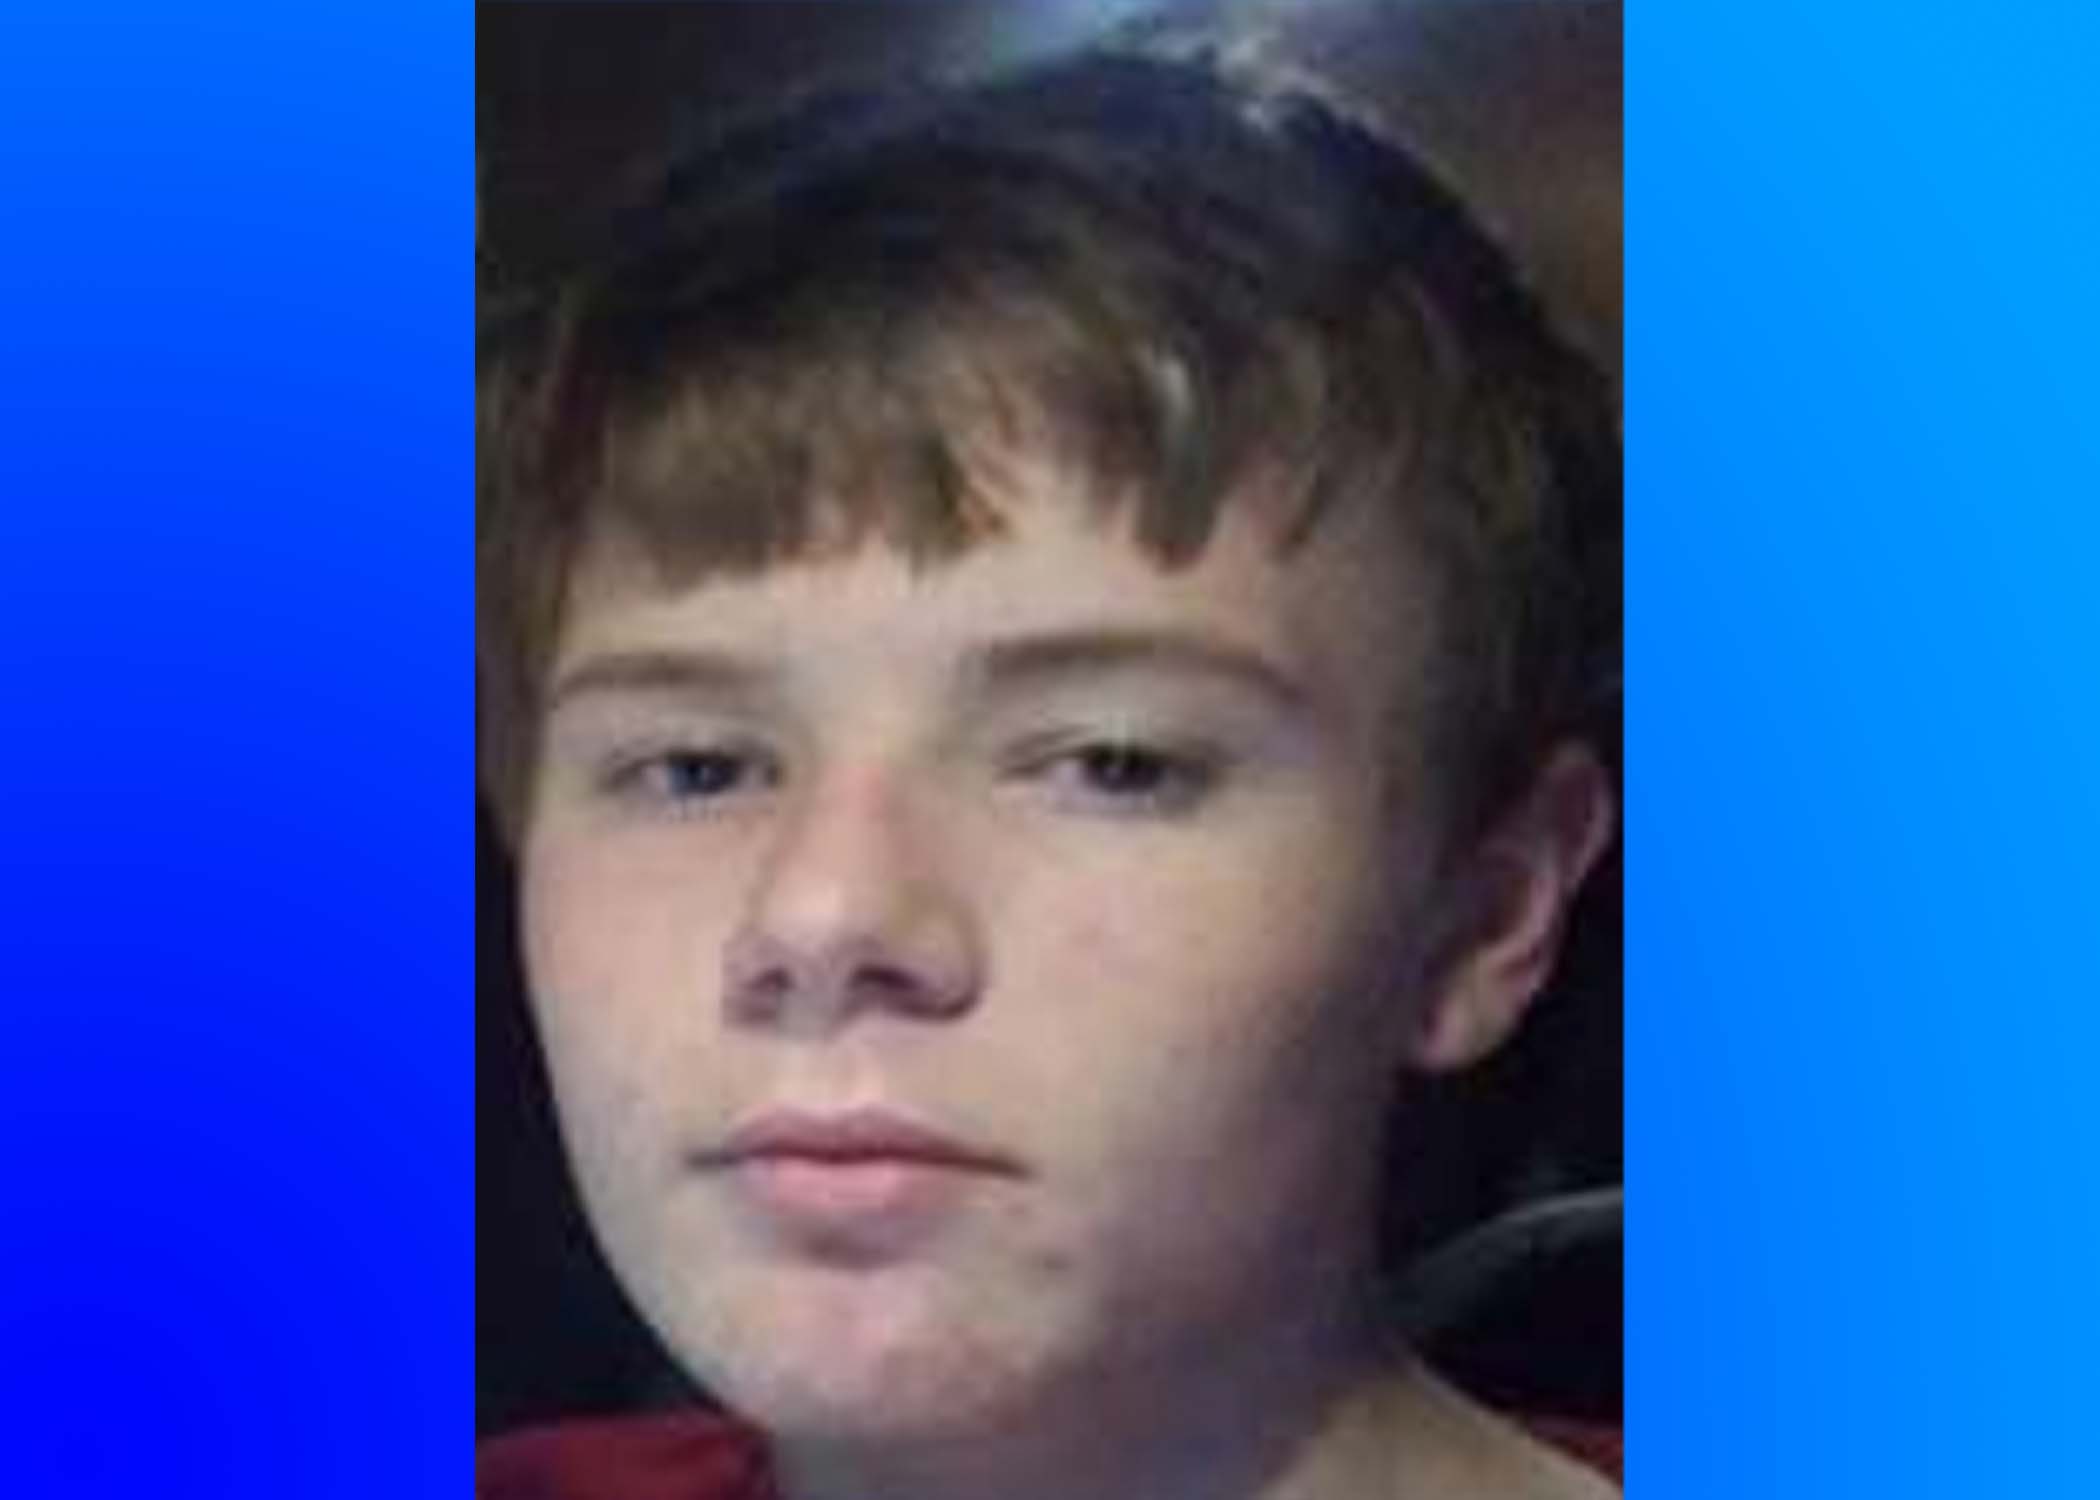 Missing Child Alert Issued for missing 14-year-old